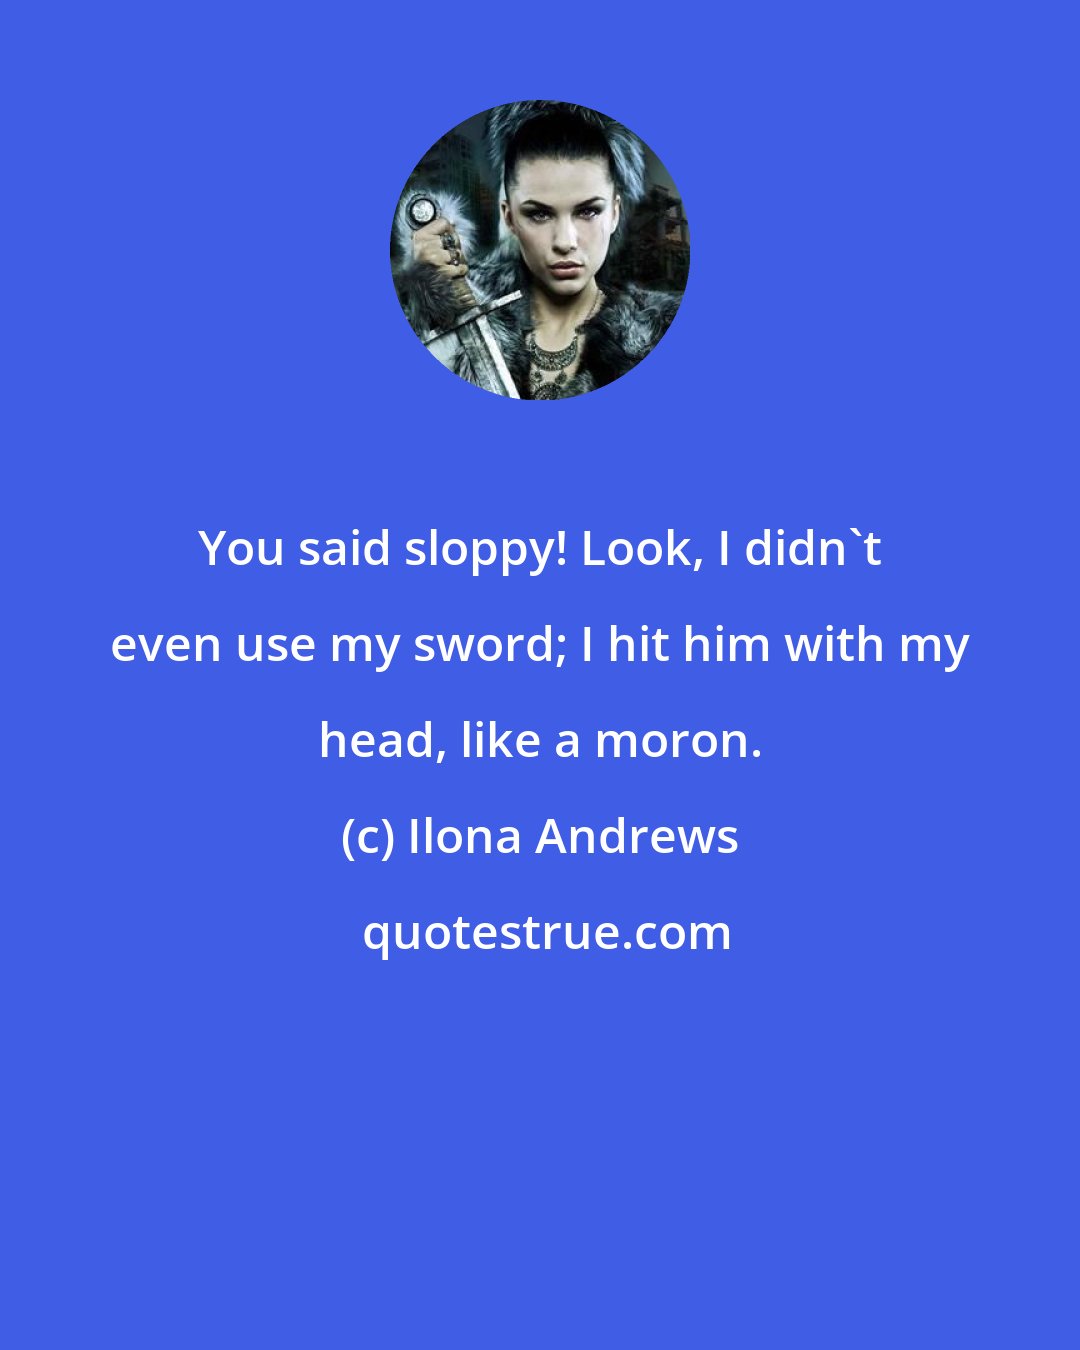 Ilona Andrews: You said sloppy! Look, I didn't even use my sword; I hit him with my head, like a moron.